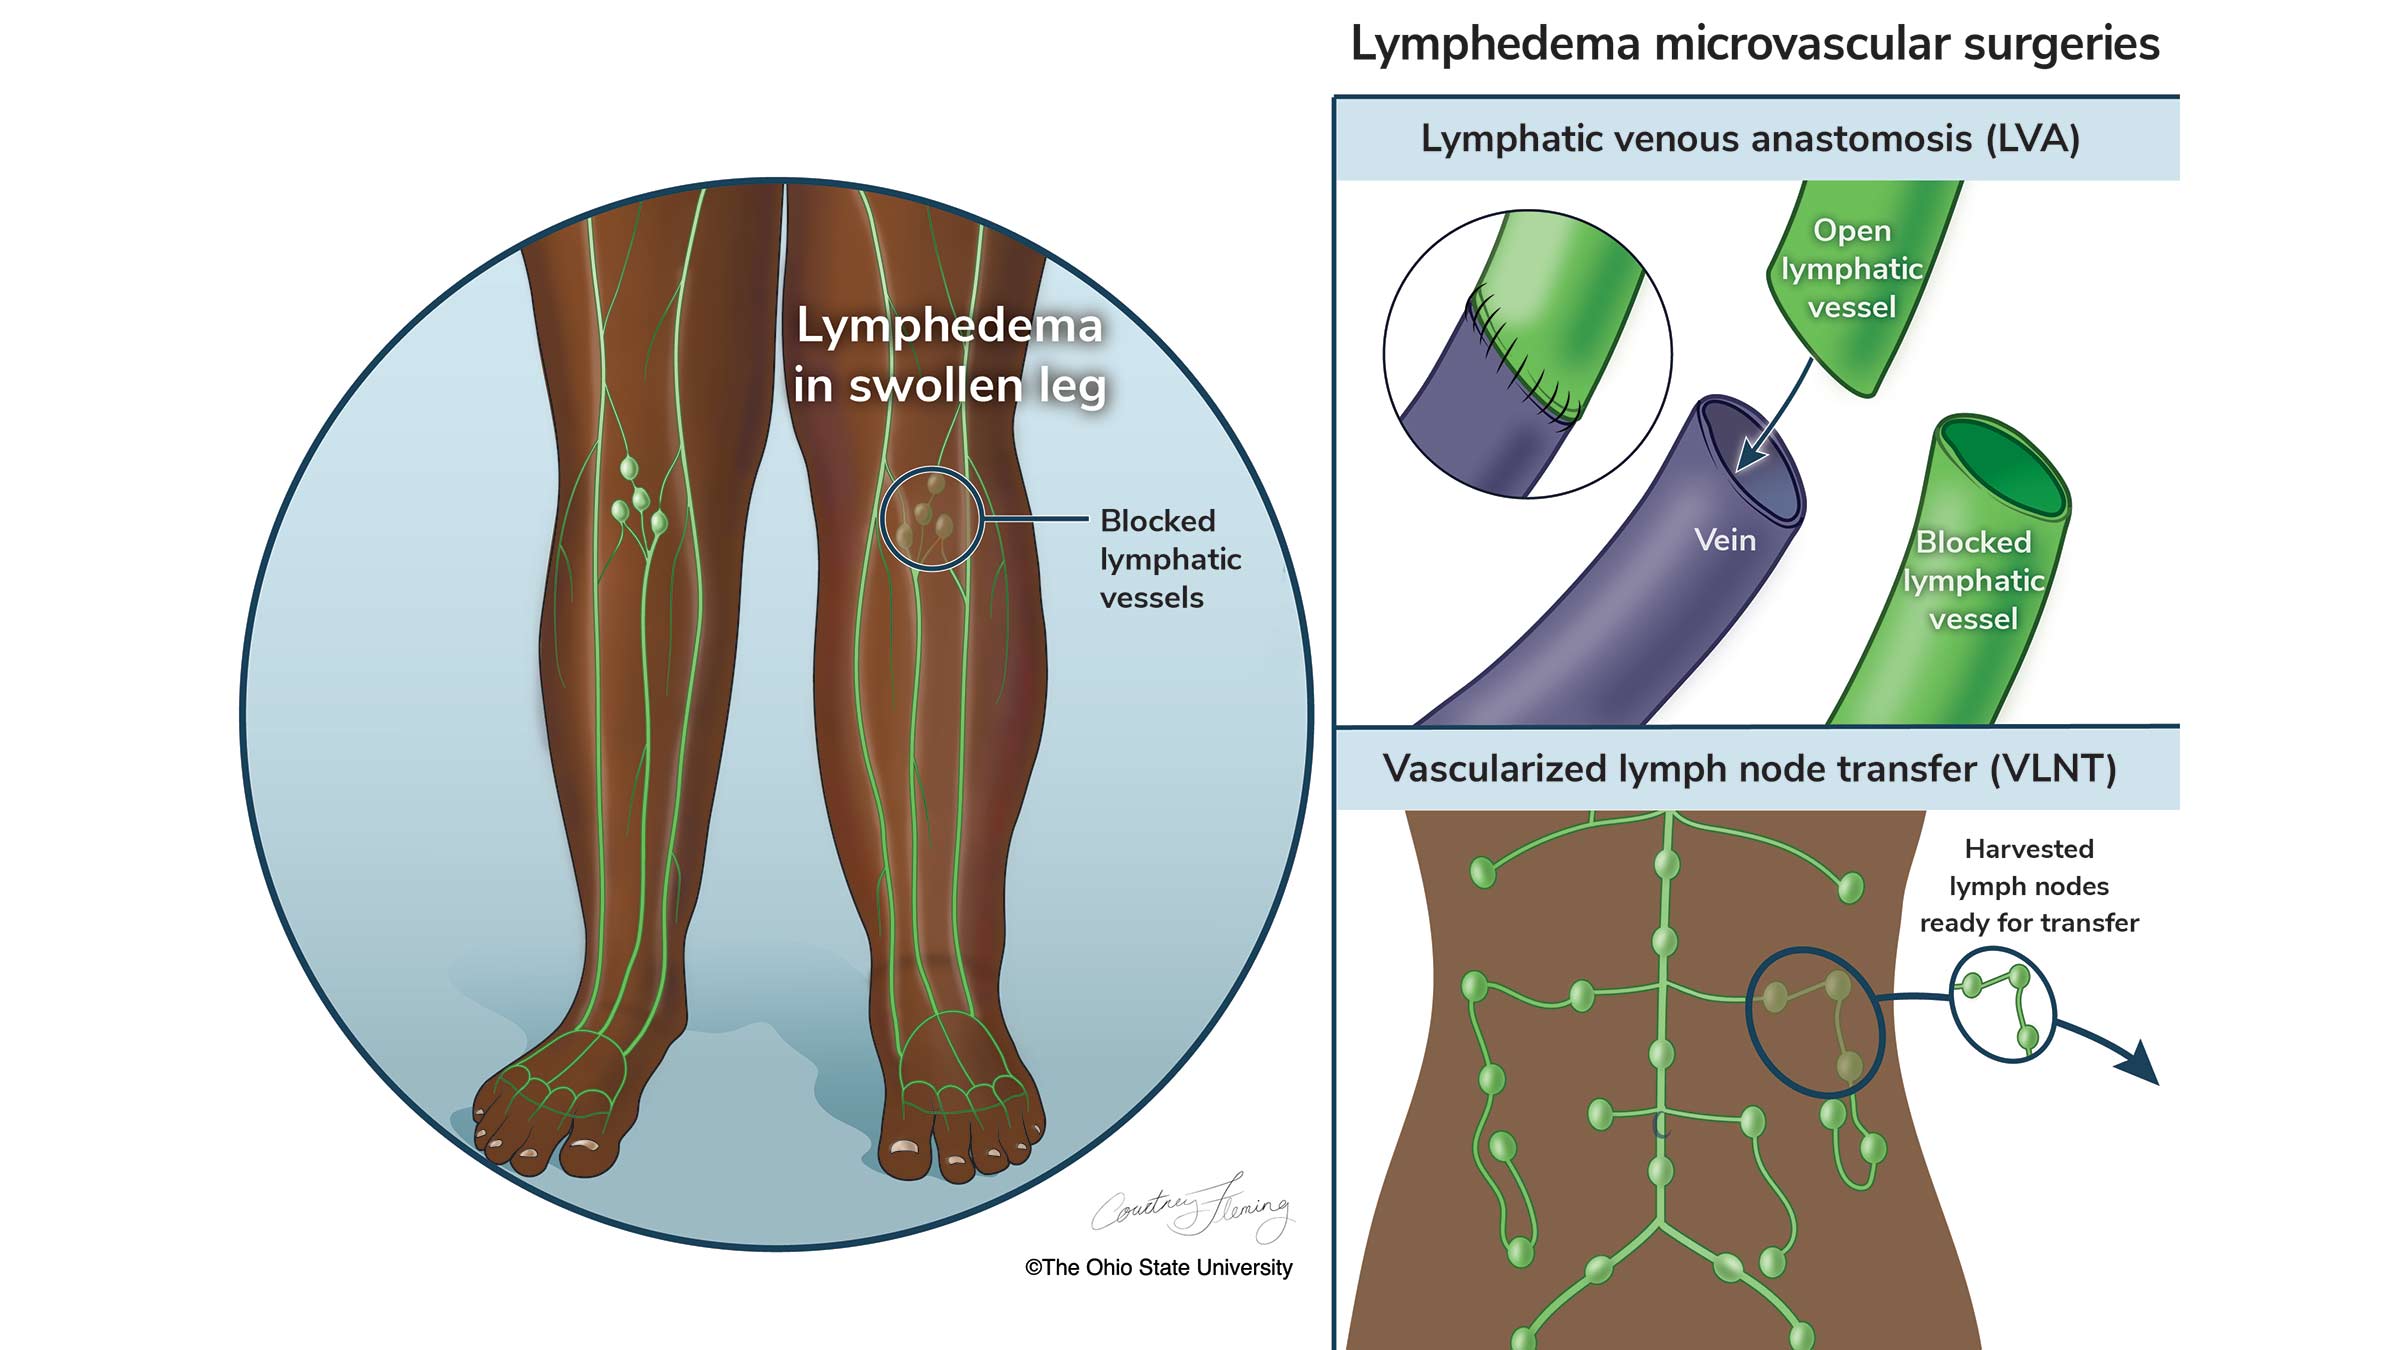 Lymphedema microvascular surgeries graphic illustration